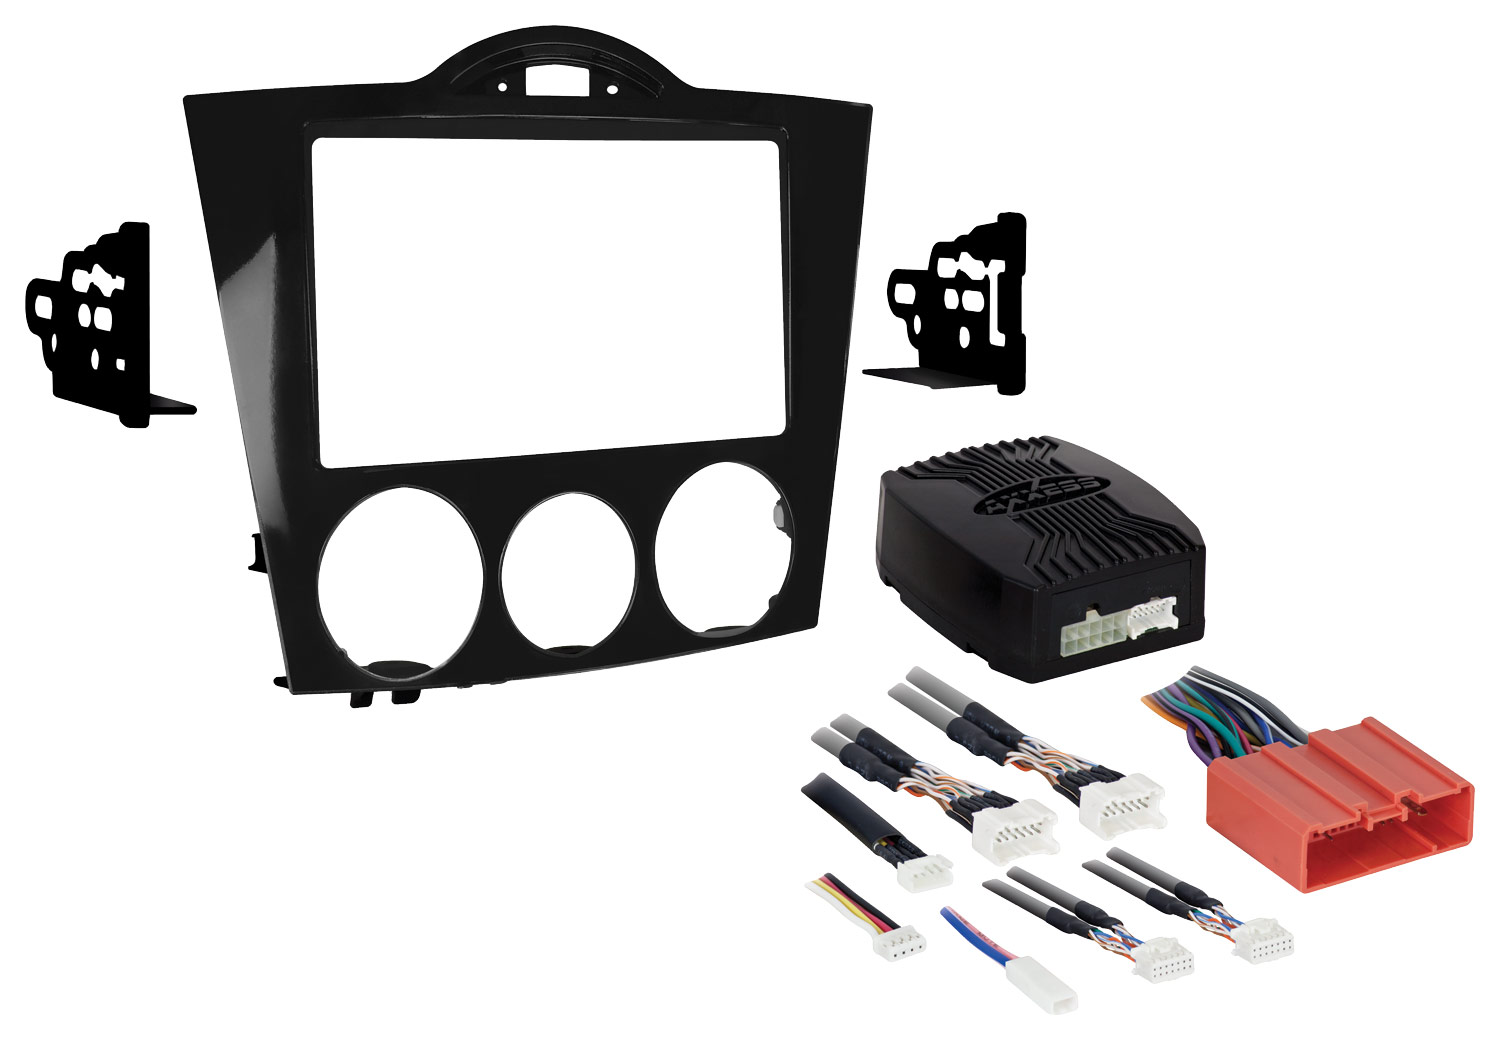 Metra - Installation Kit for Most 2004-2008 Mazda RX-8 Vehicles - Black was $249.99 now $187.49 (25.0% off)